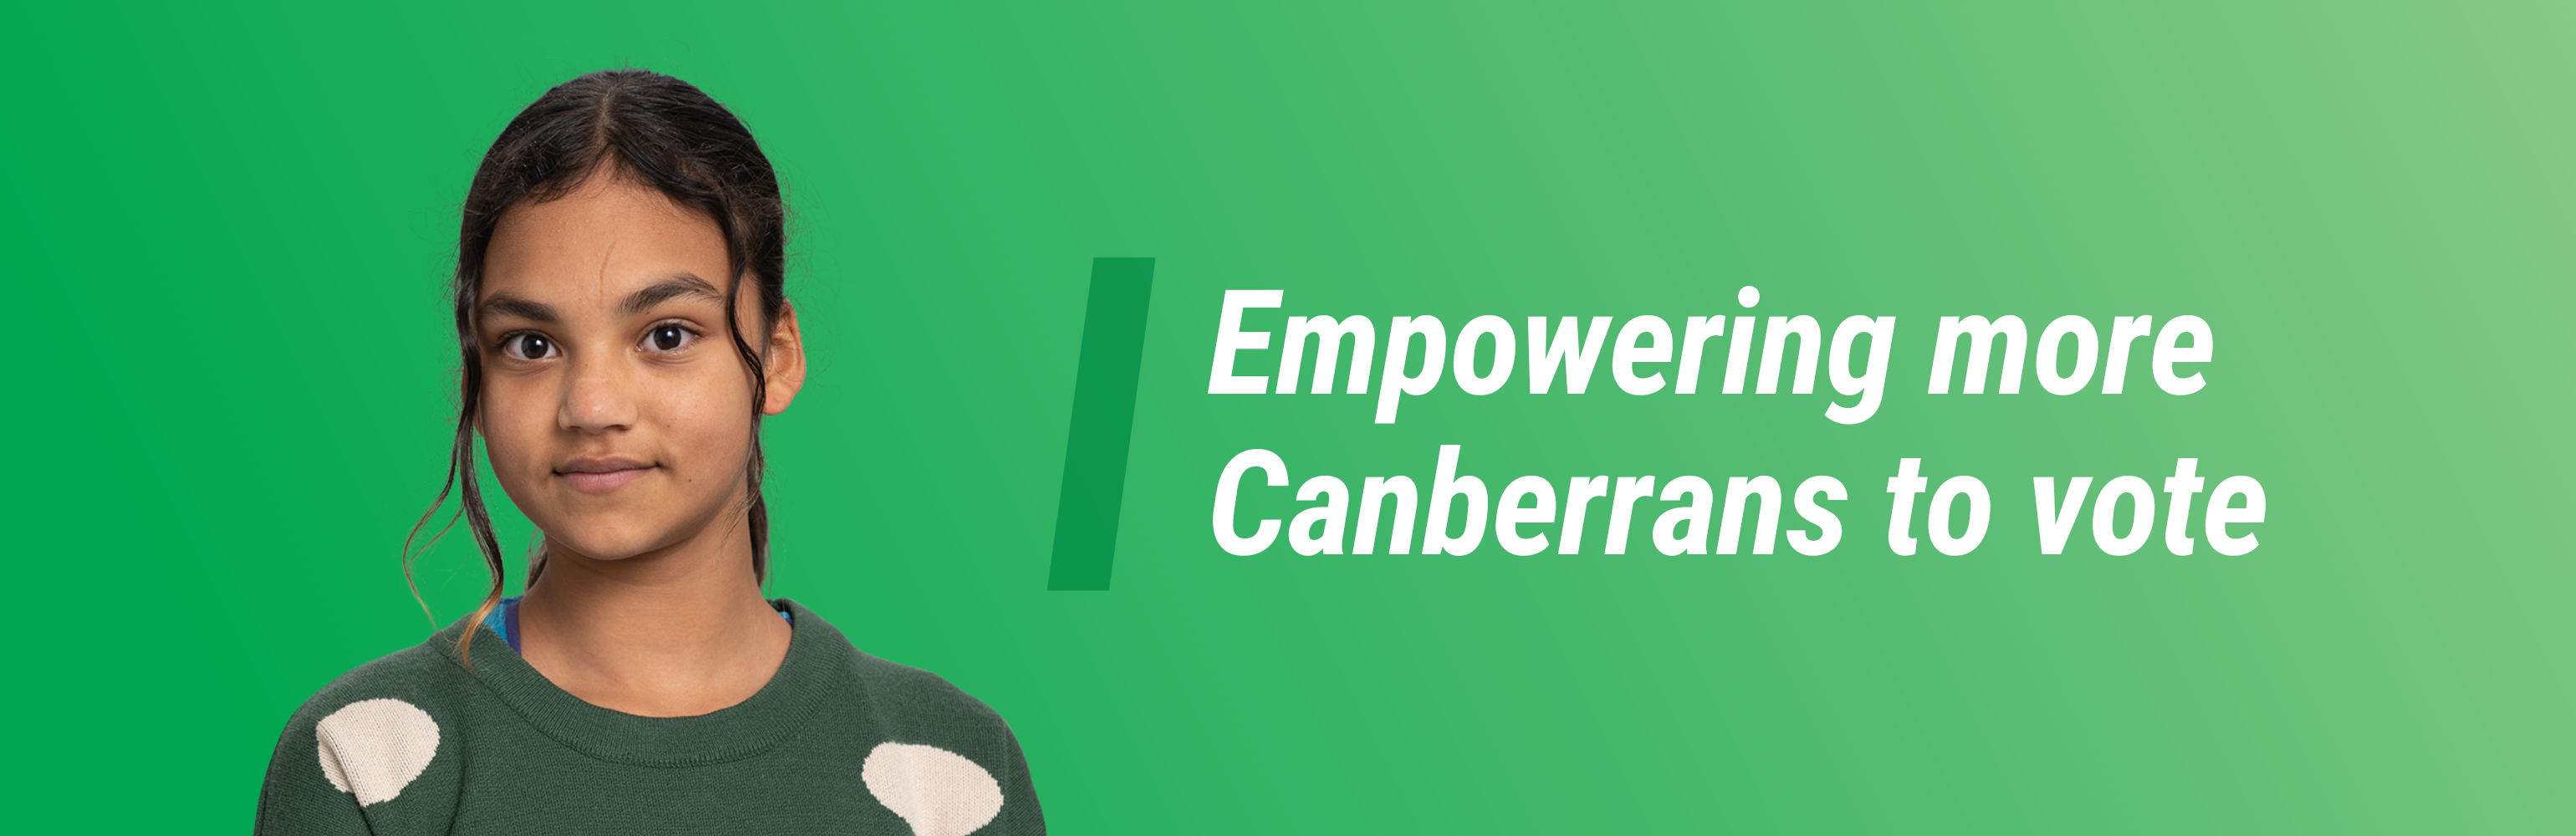 'Empowering more Canberrans to vote'